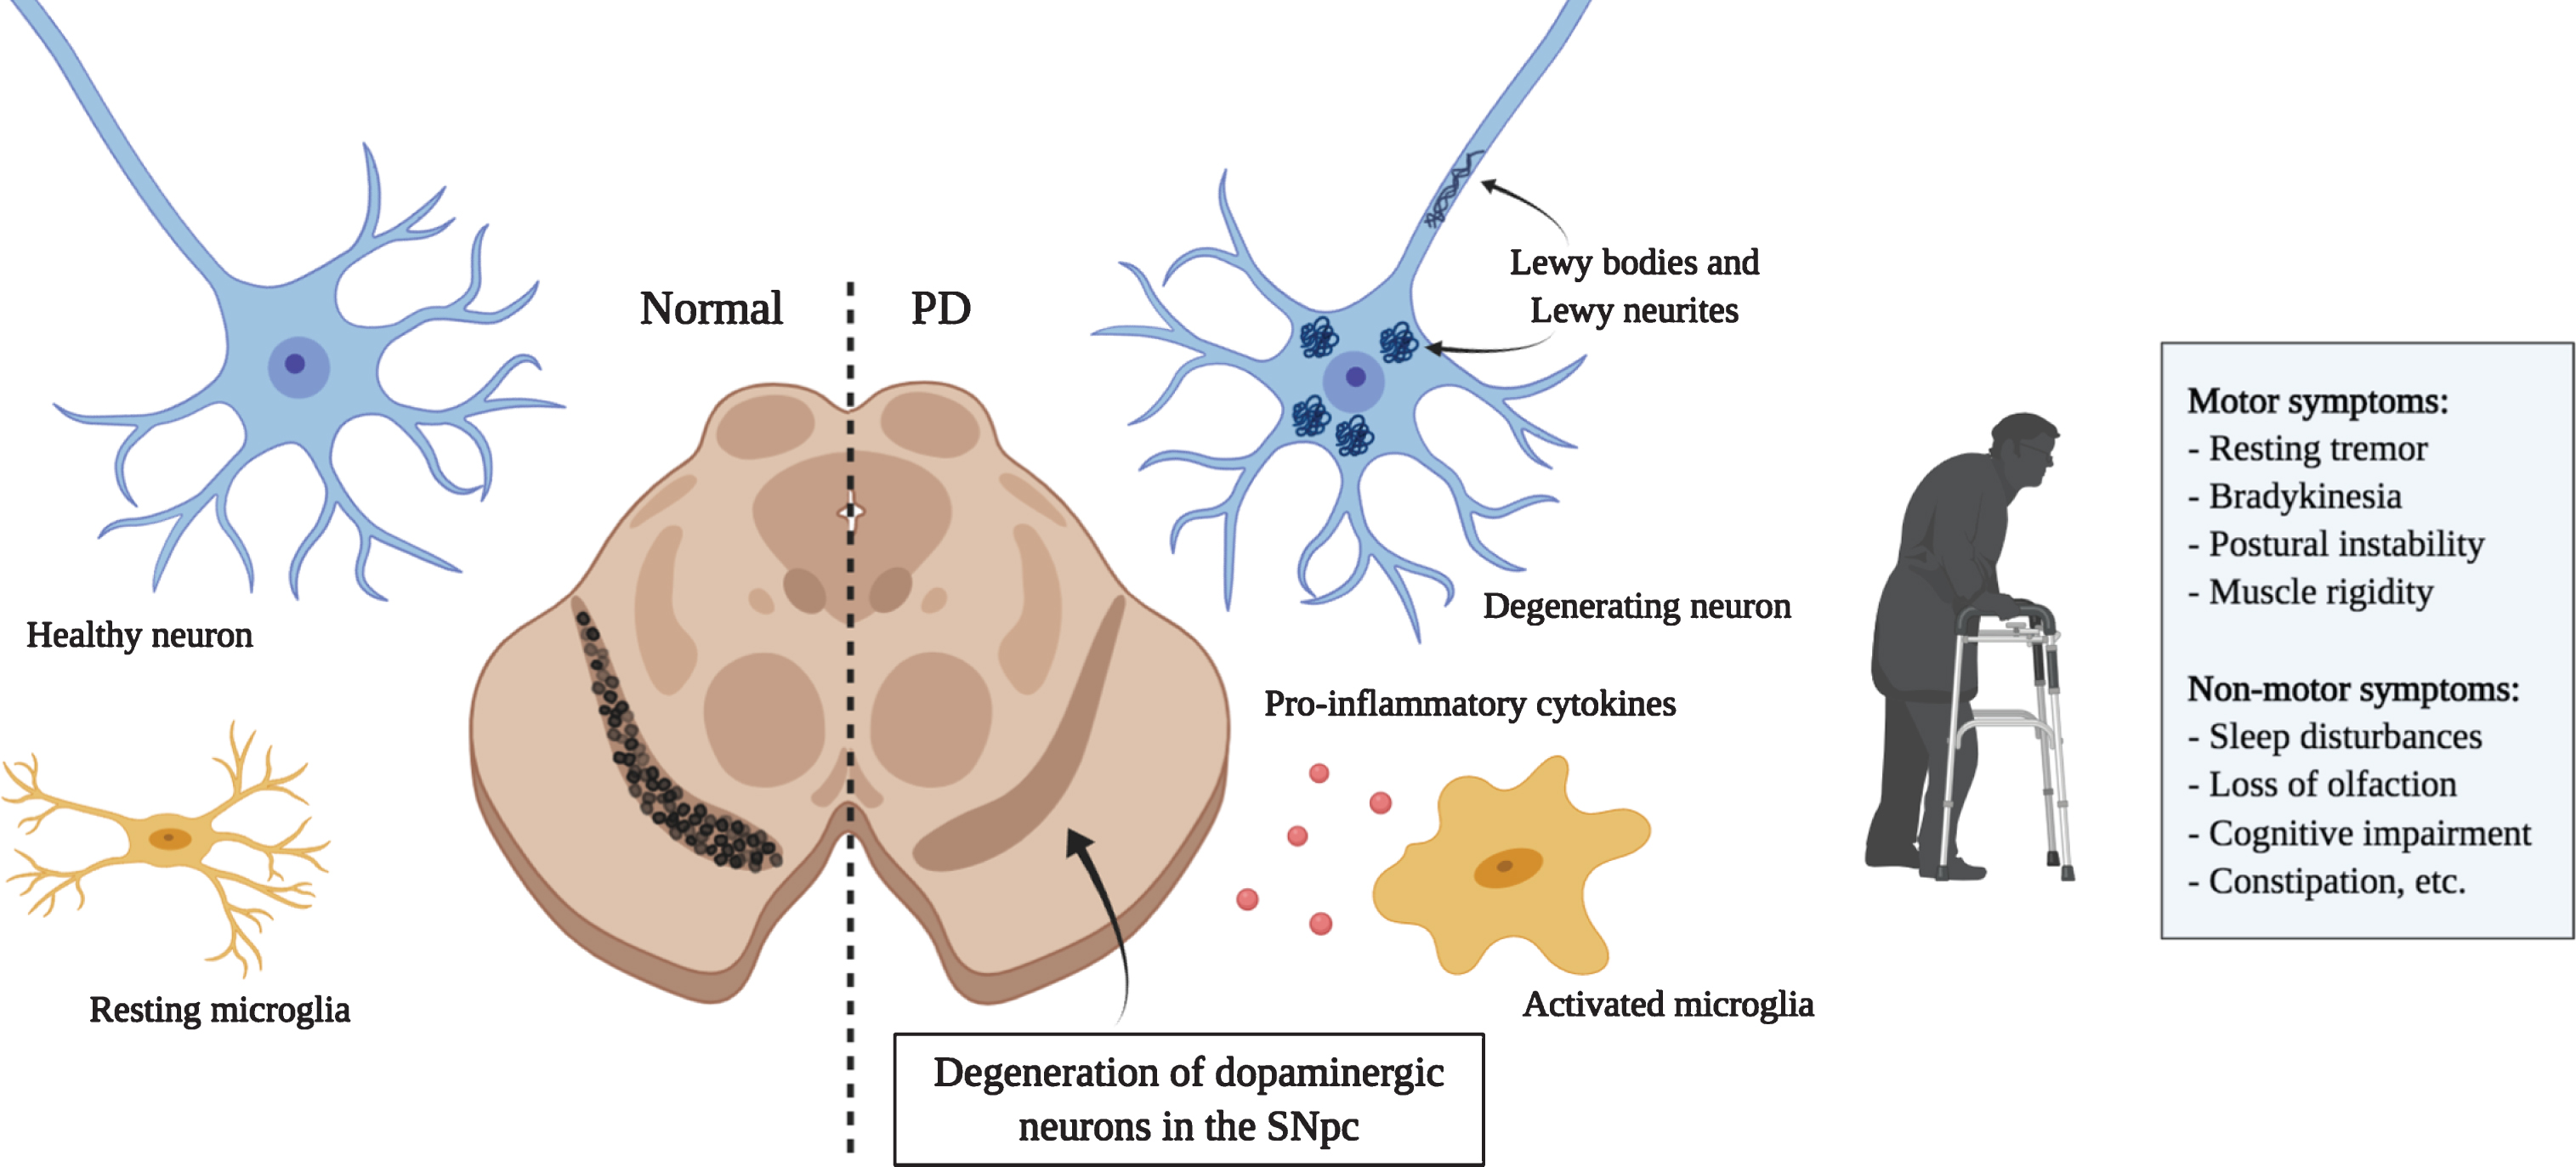 Principal hallmarks of Parkinson’s disease. Parkinson’s disease is characterized by the loss of dopaminergic neurons in the substantia nigra. Affected neurons present insoluble aggregates in their cytoplasm and neurites called Lewy bodies and Lewy neurites, respectively. These inclusions are predominantly composed of the protein alpha-synuclein. Activated microglia releasing pro-inflammatory cytokines are also present and promote an inflammatory environment possibly contributing to neuronal loss. Dopaminergic neuron degeneration leads to the classical motor symptoms. It is hypothesized that the affection of non-dopaminergic neurons in other brain regions would be responsible for the various non-motor symptoms that also greatly affect quality of life. (Created with BioRender)